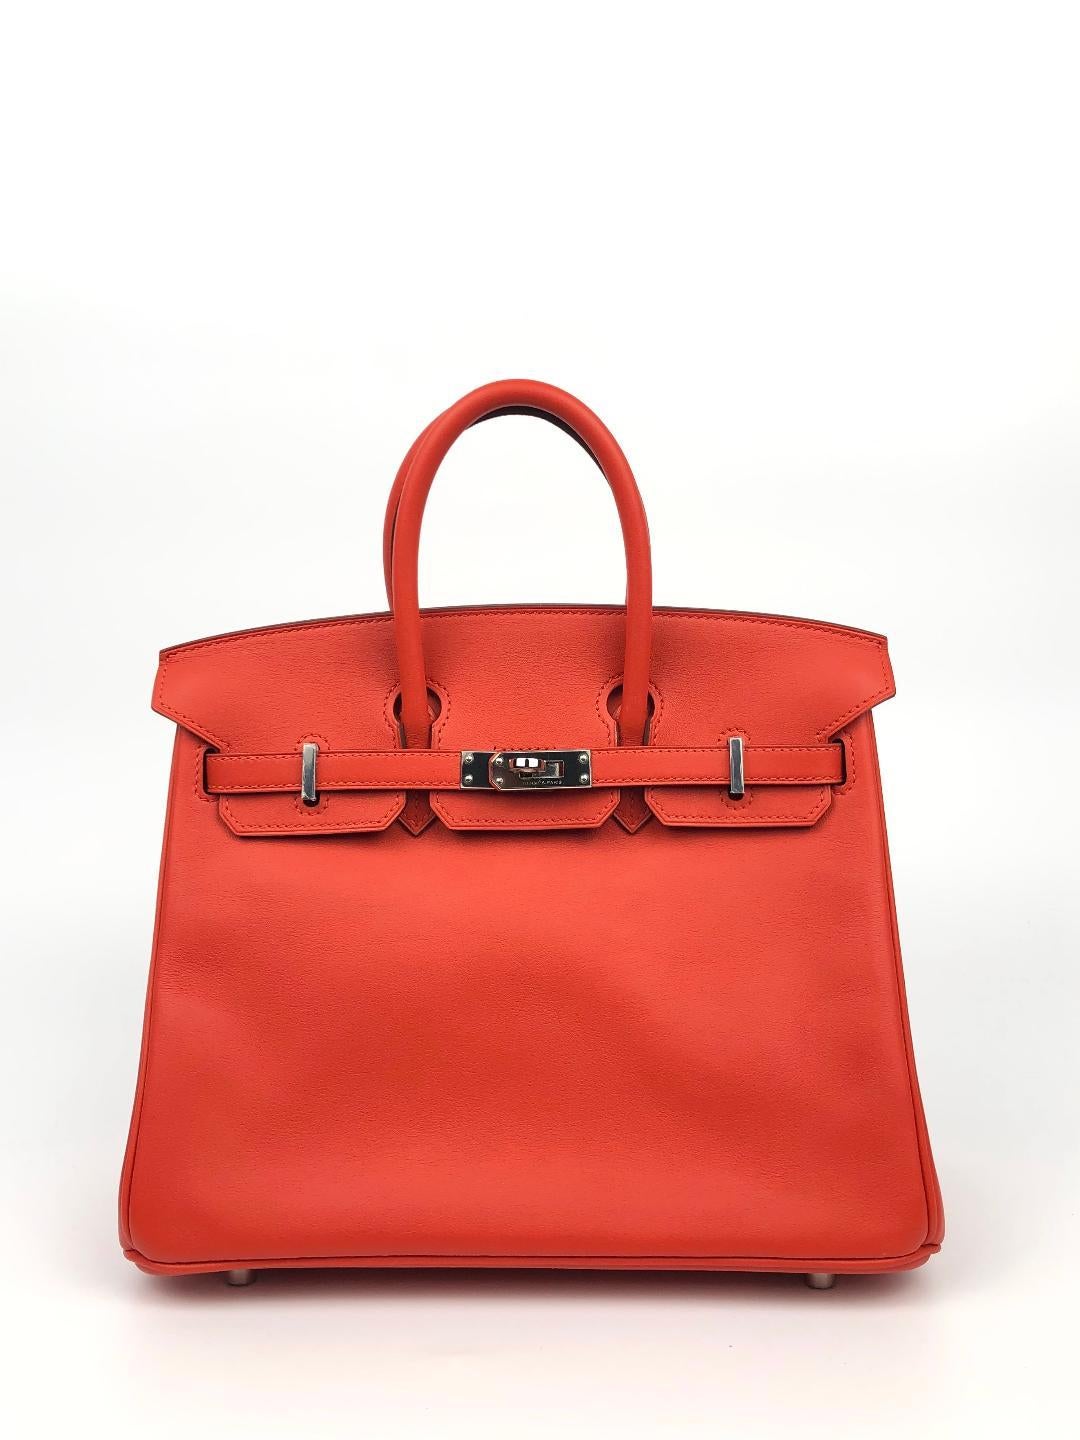 This authentic Hermès Rouge Tomate Swift Leather 25 cm Birkin Bag is in pristine unworn condition with plastic intact on the hardware.

Waitlists exceeding a year are commonplace for the intensely coveted classic leather Birkin bag.  Each piece is